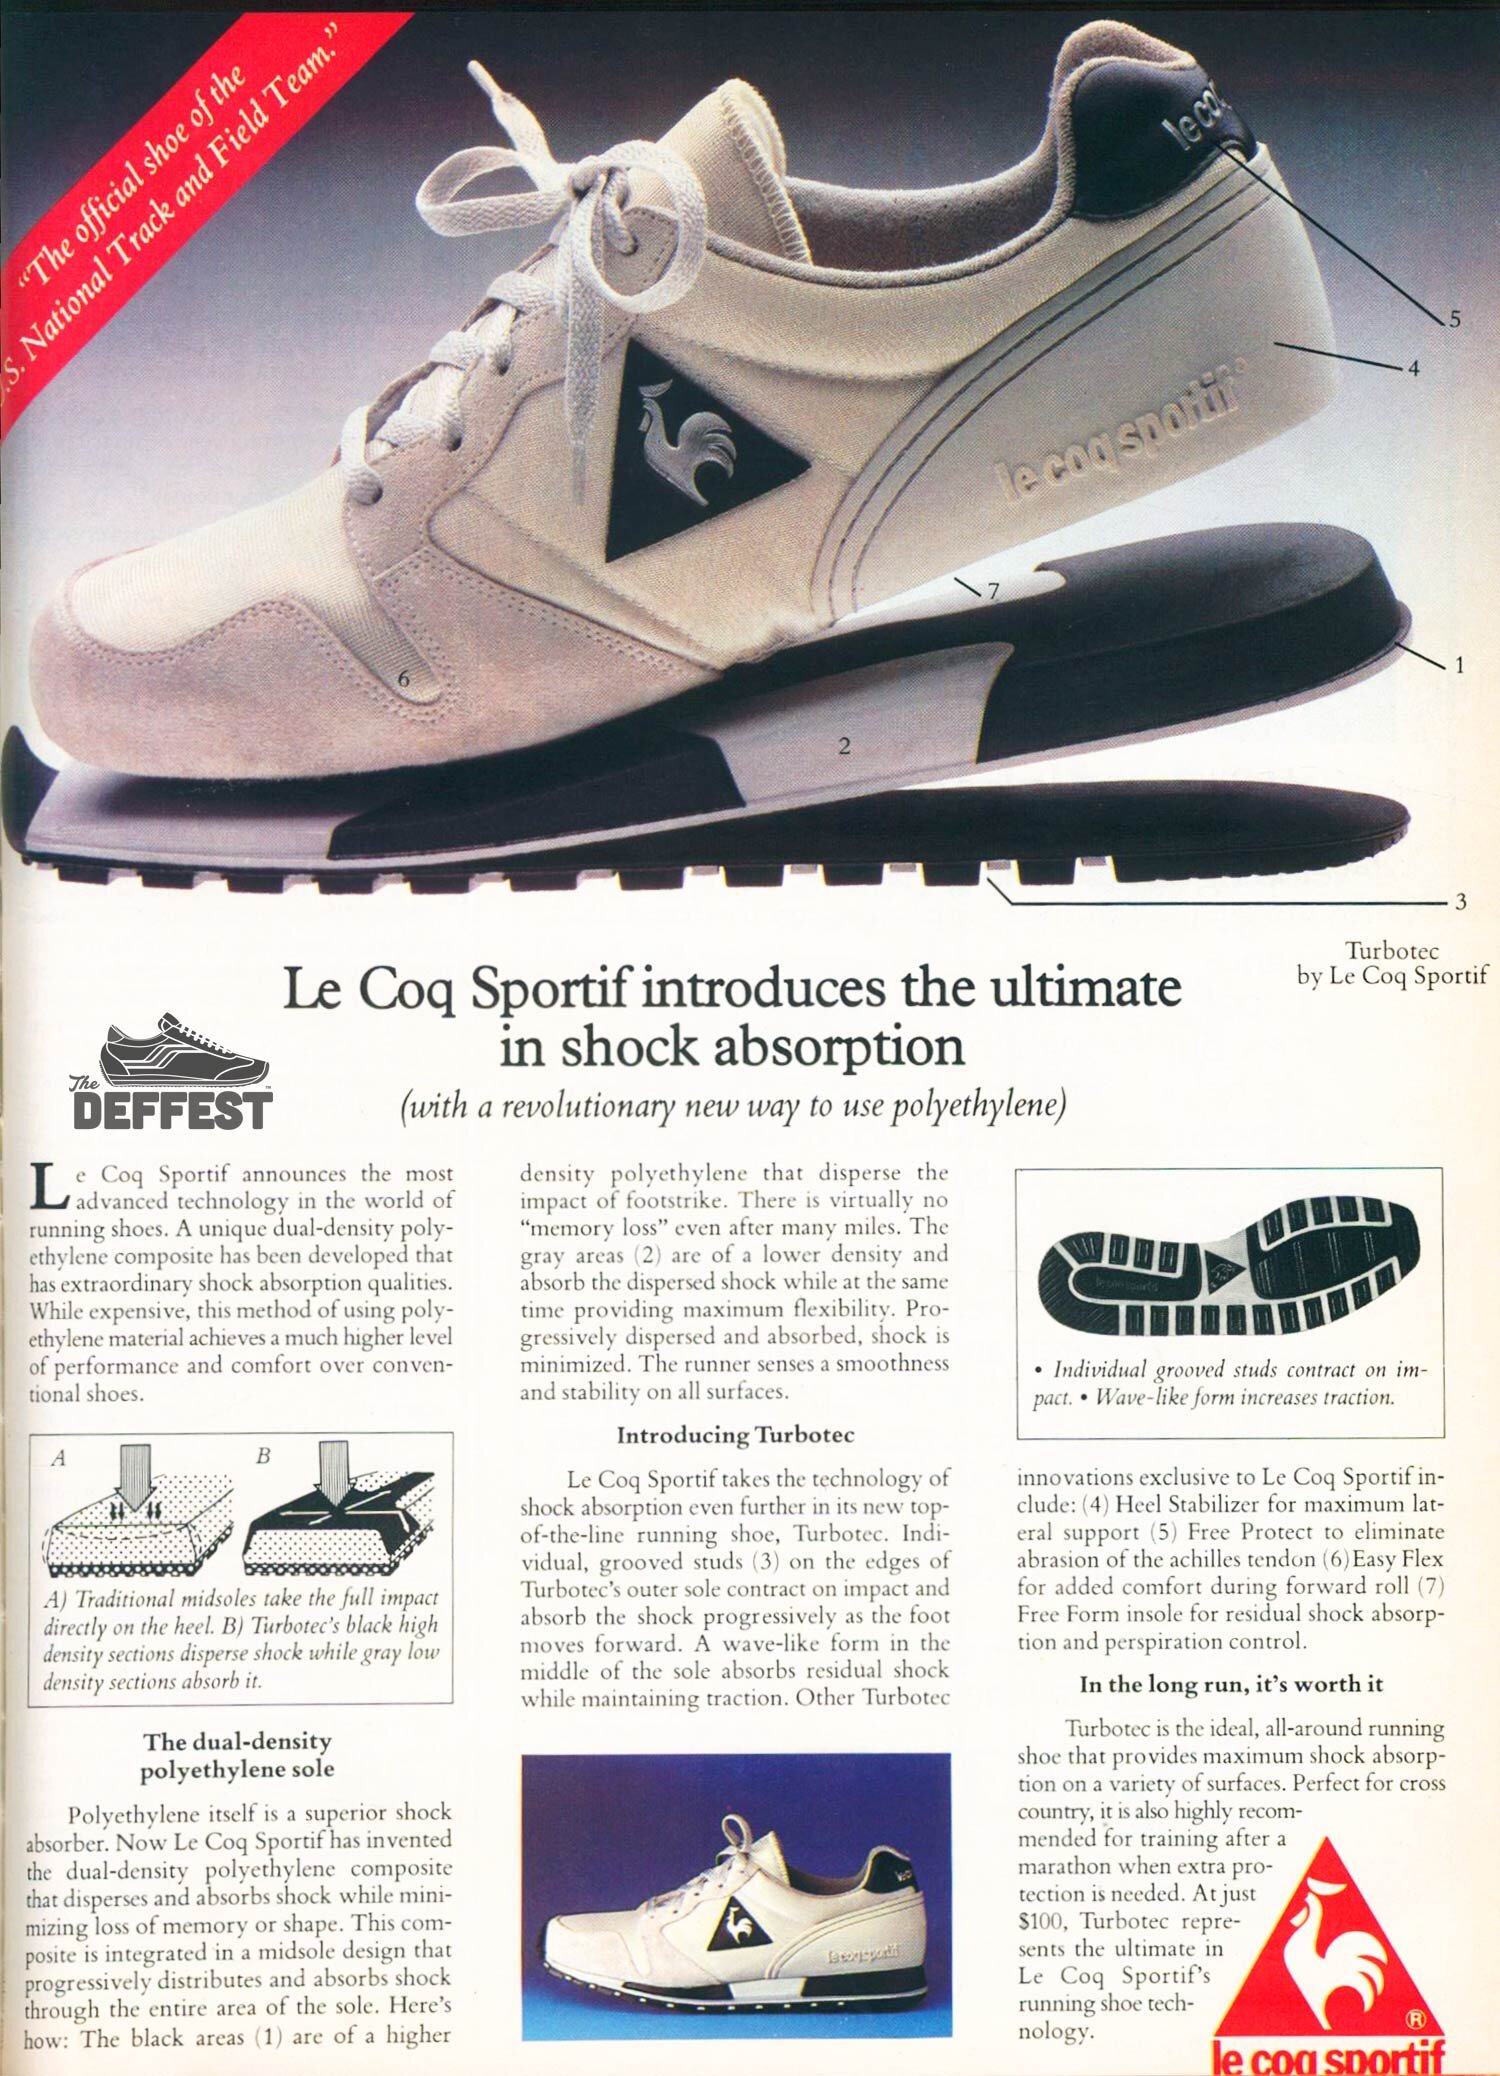 le coq sportif shoes in usa